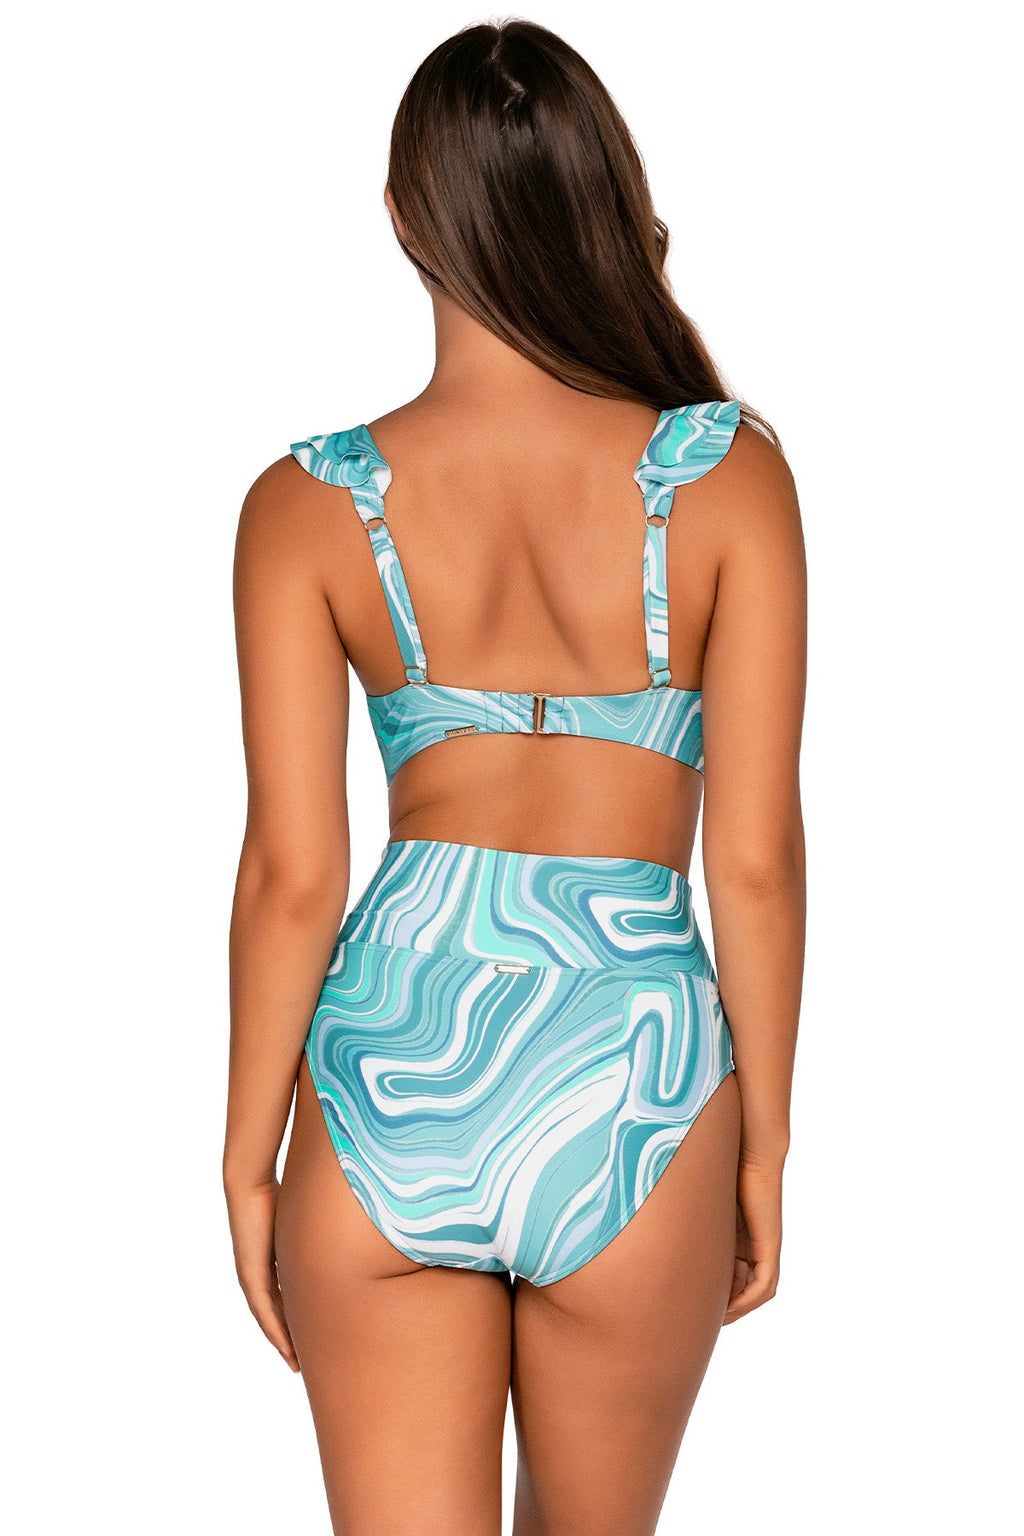 Buy Sunsets Swimwear: Swimsuits & Bathing Suits for Women